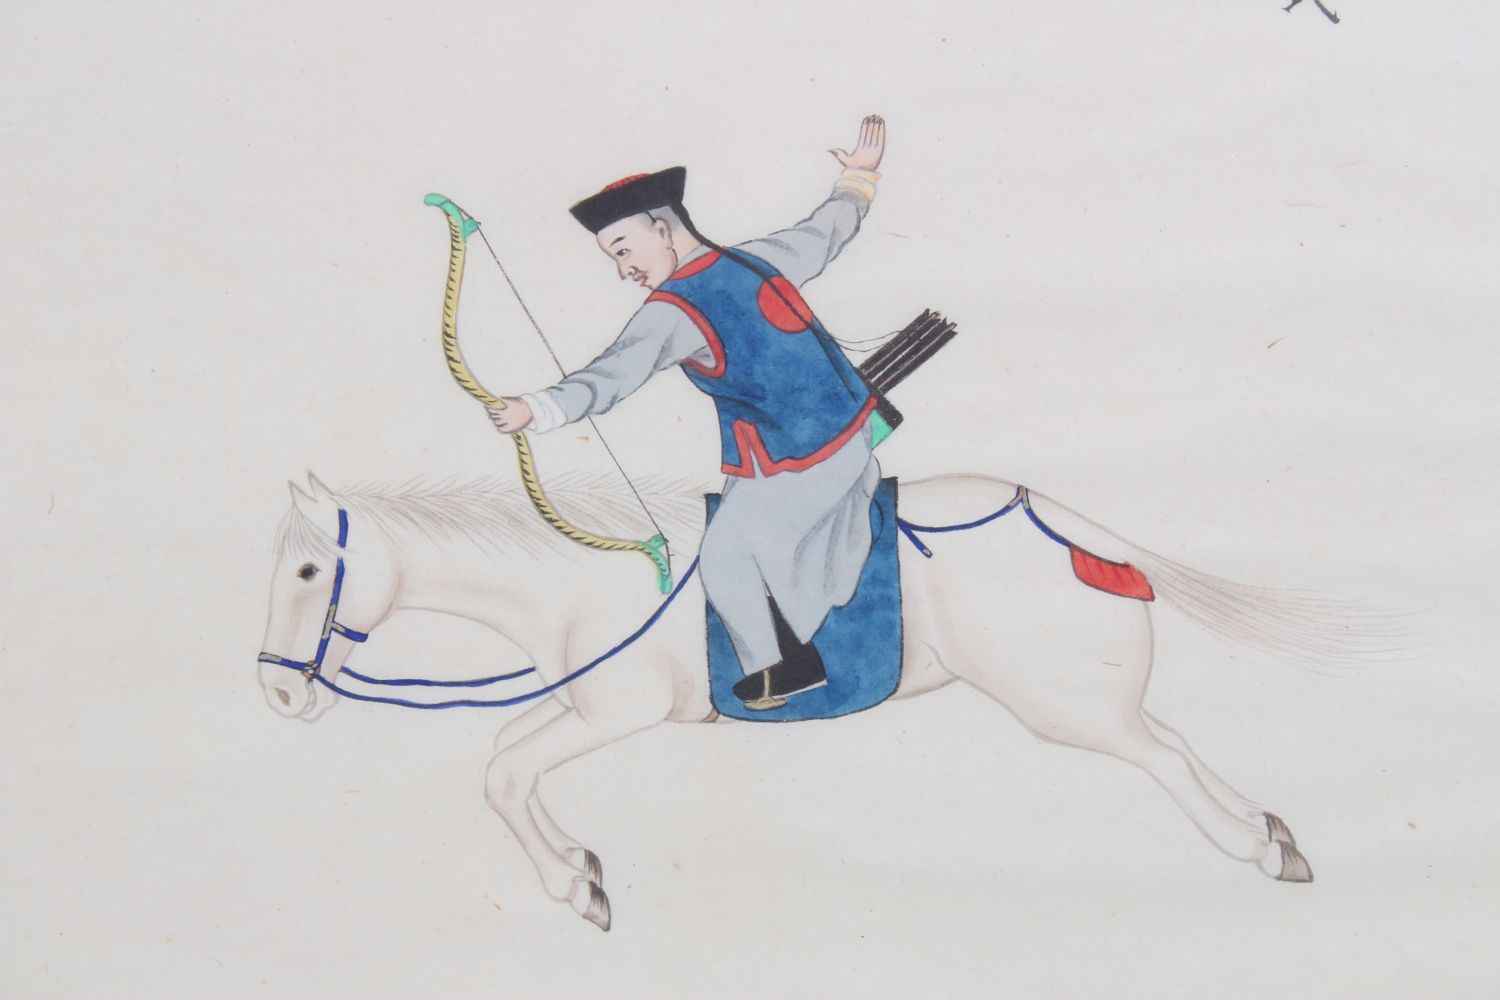 TWO 19TH CENTURY CHINESE PAINTINGS ON PAPER - HORSES & ACTORS, the pictures depicting a figure on - Image 7 of 9